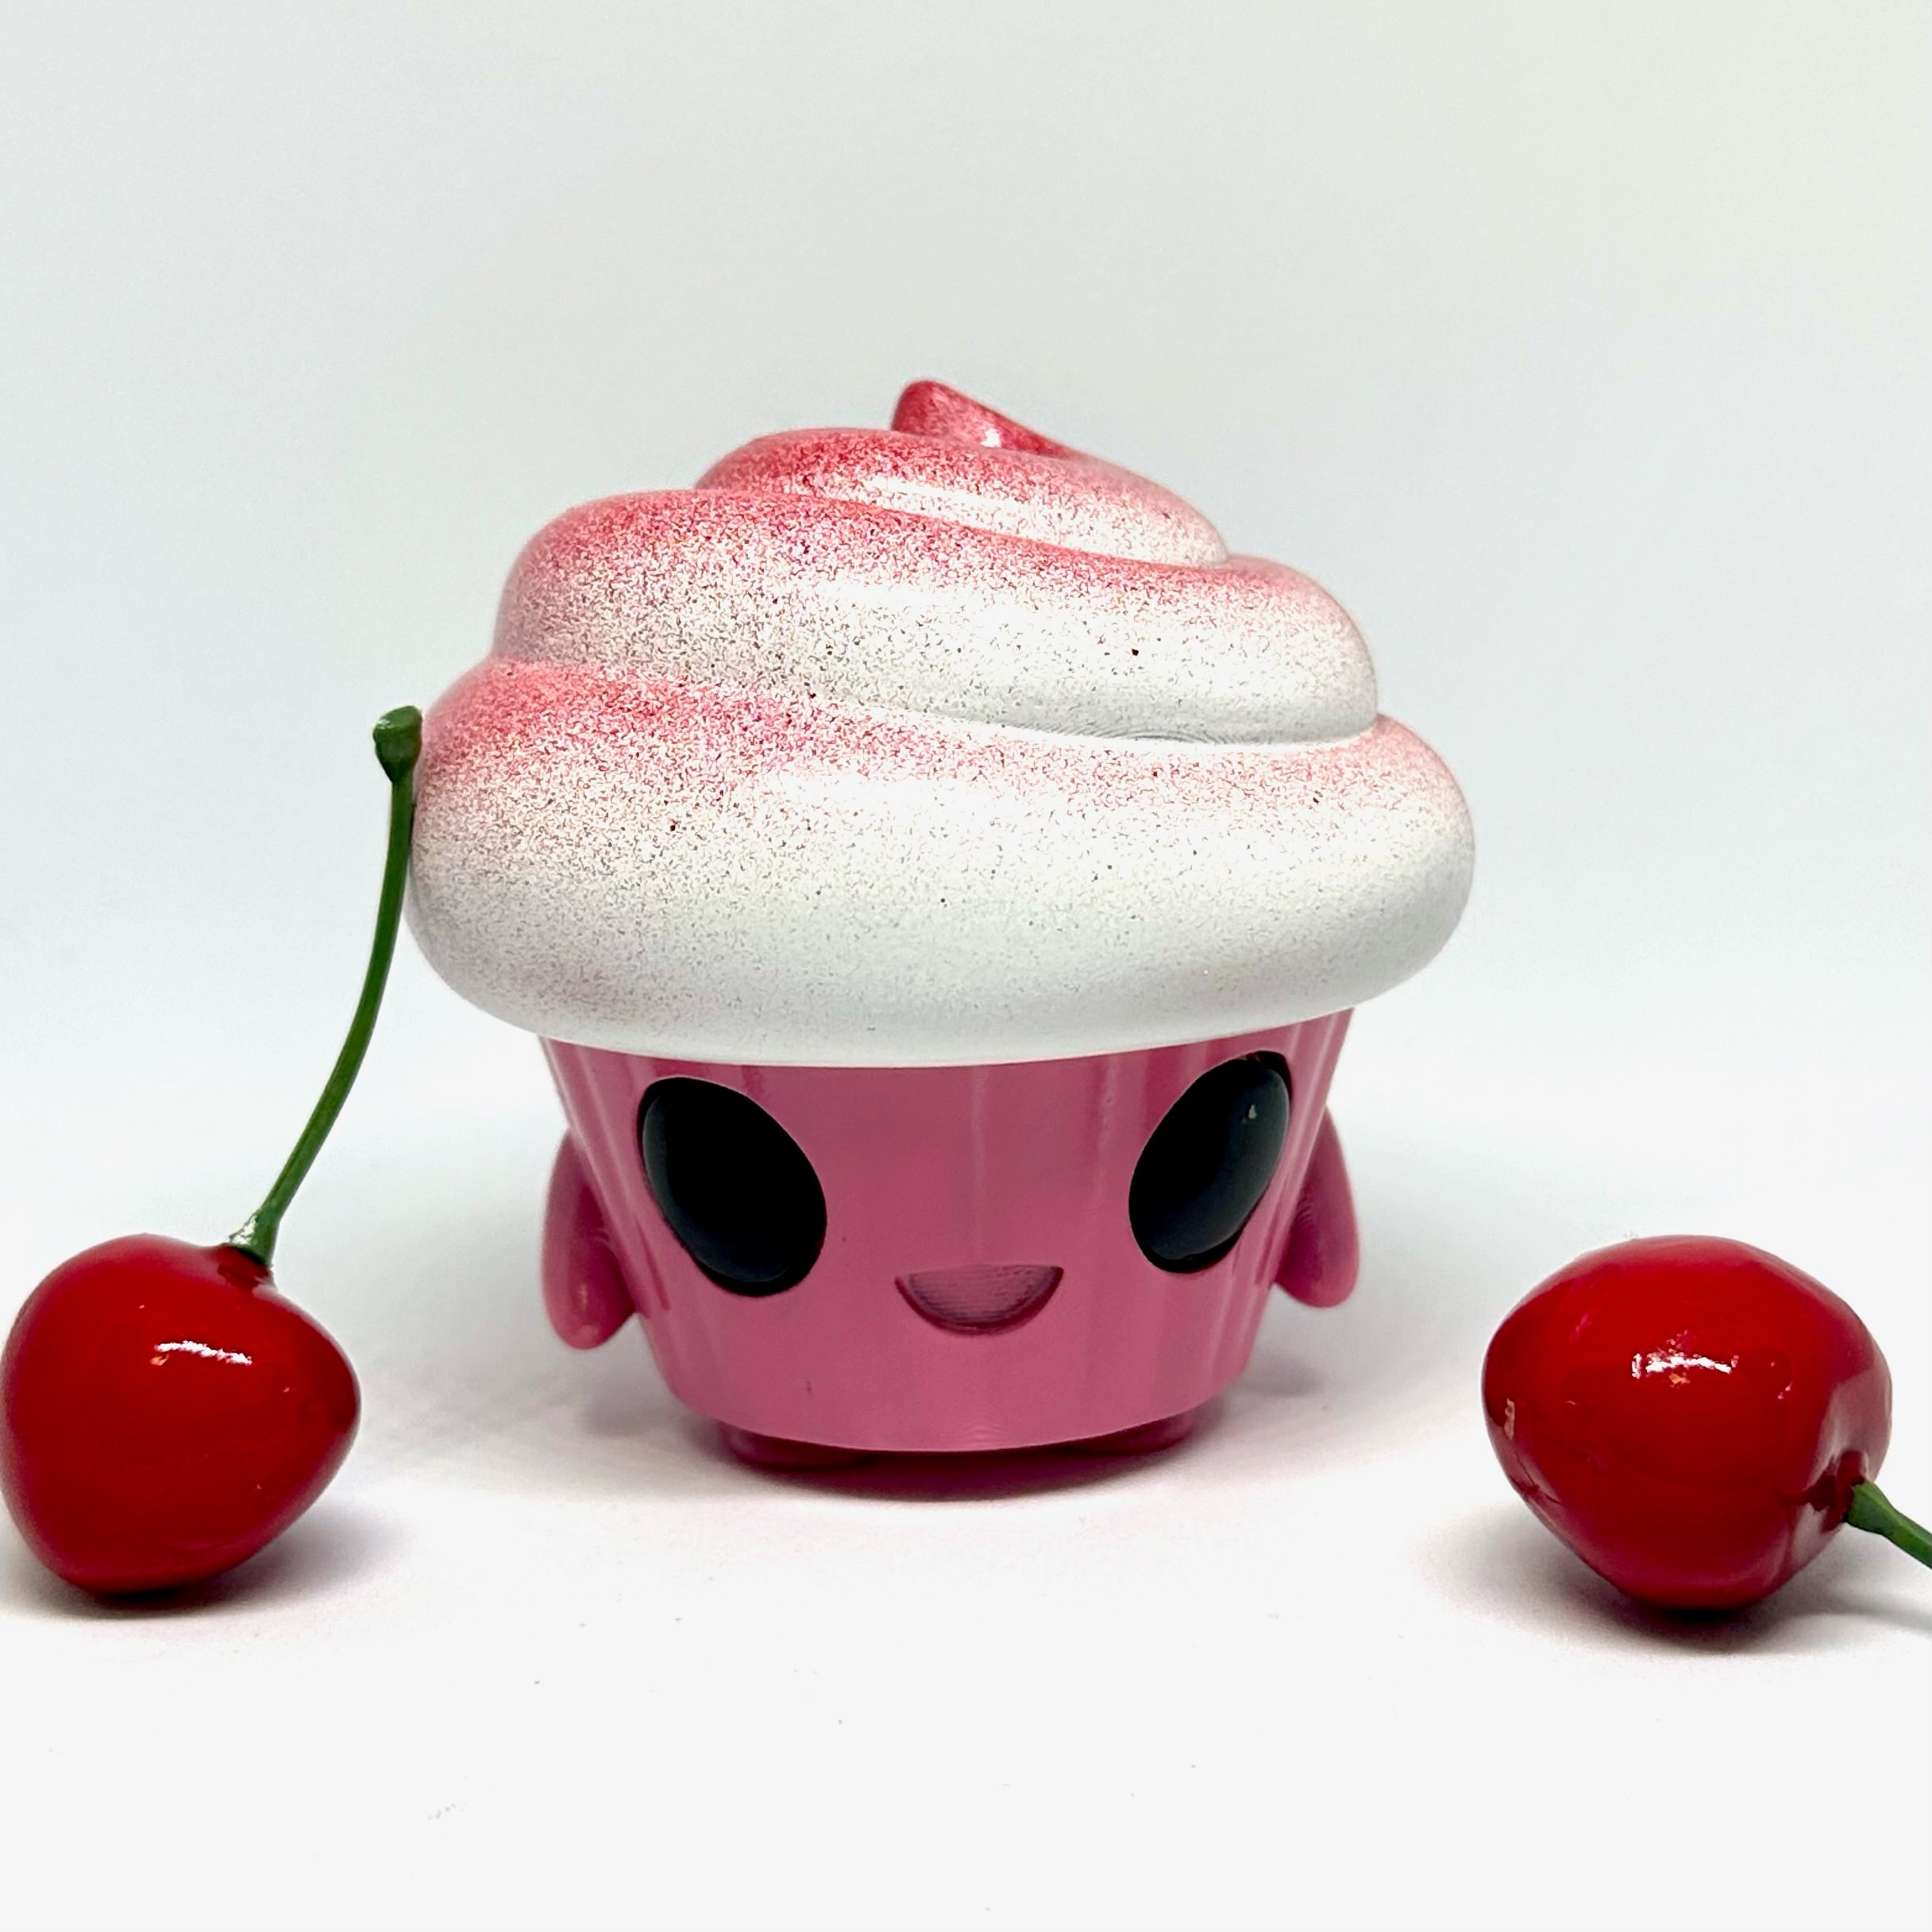 Toy cupcake with cherry, face, and stem, close-up of red pepper and fruit.